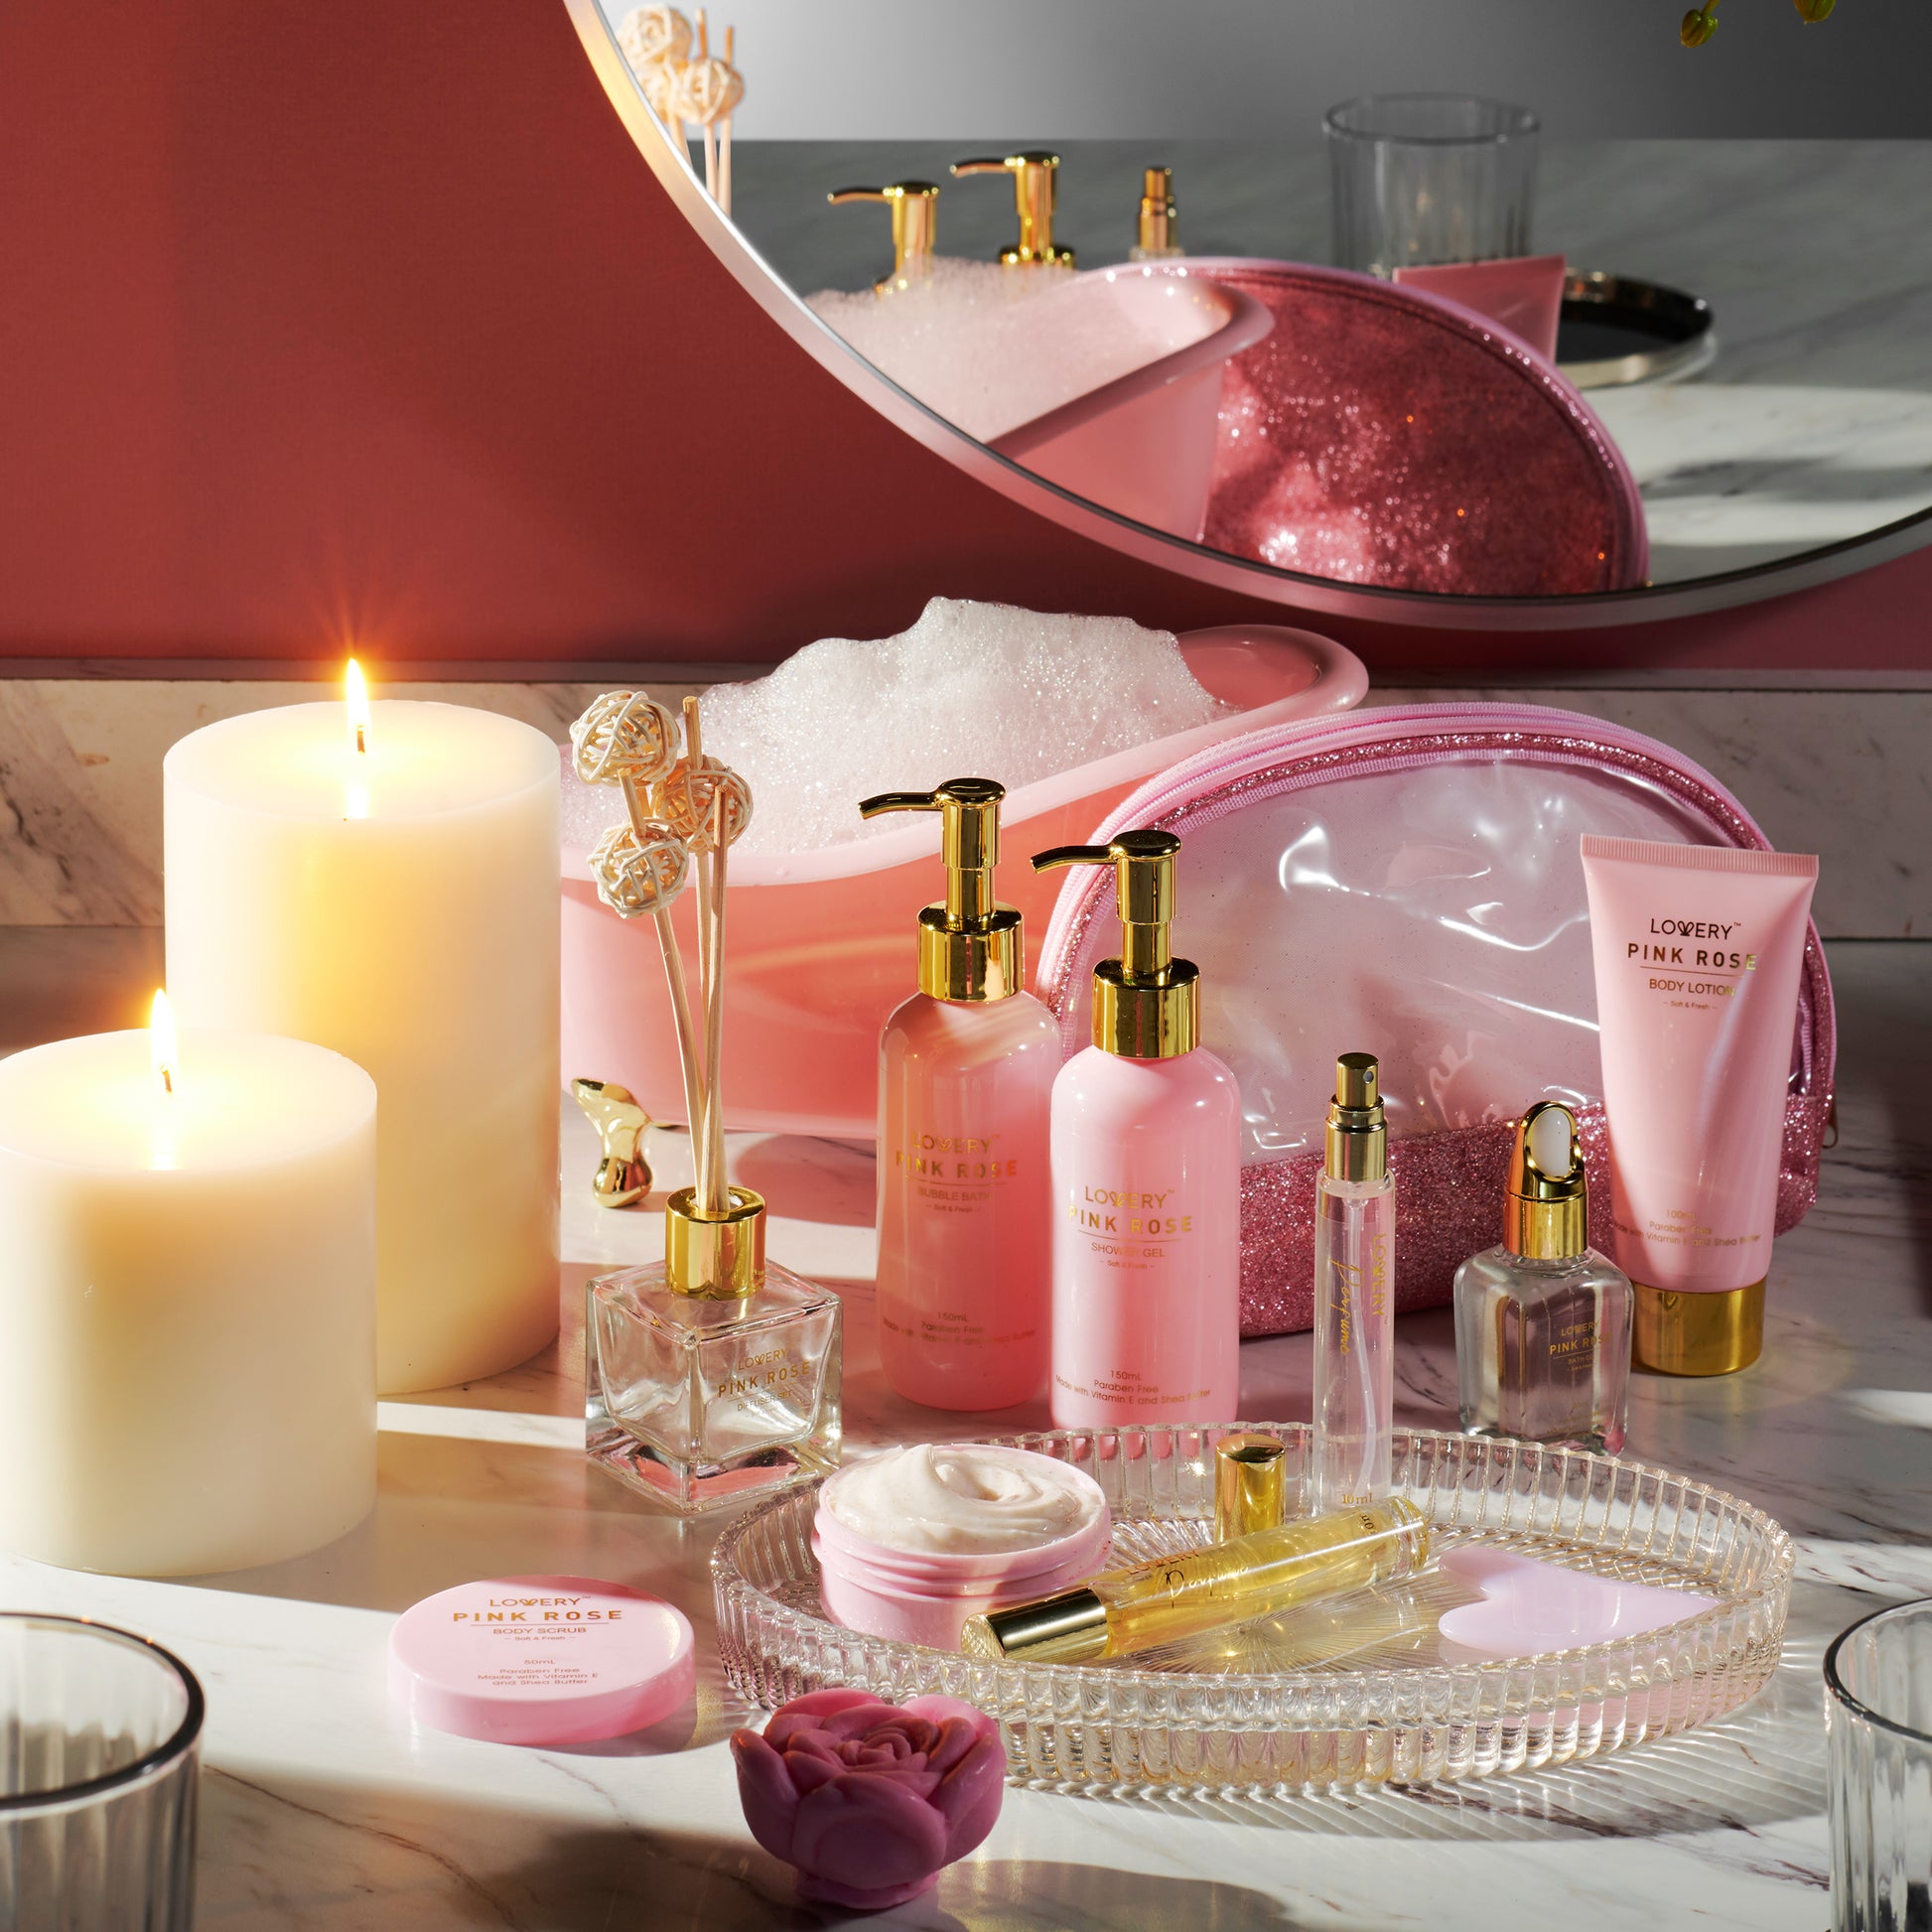 Spa accessories and candles on bathtub filled with foam and rose